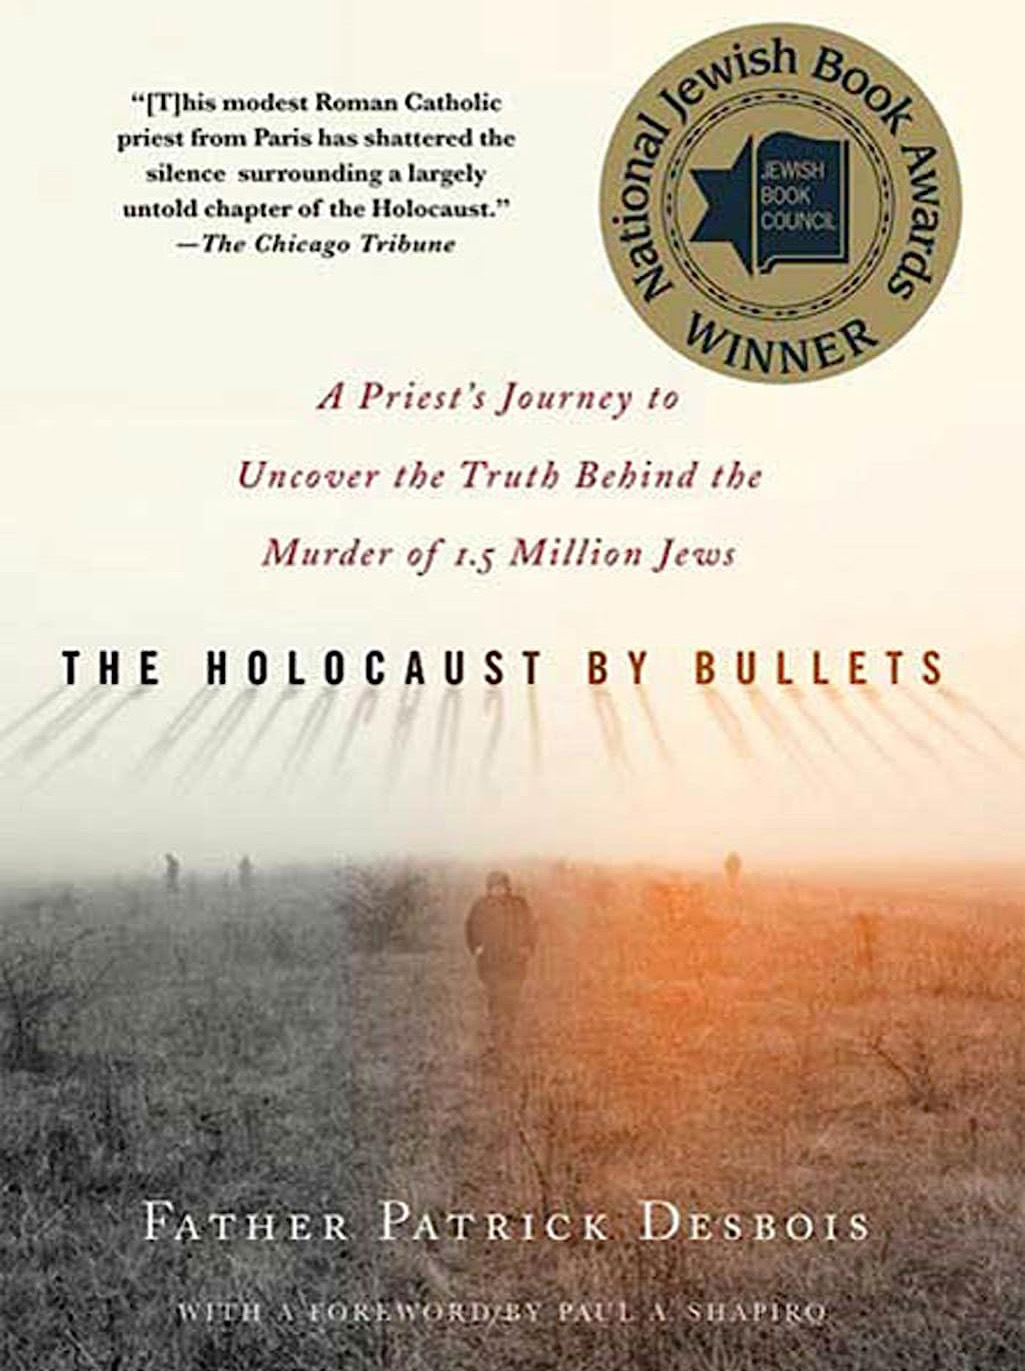 The Holocaust By Bullets- A Priest’s Journey to Uncover the Truth Behind the Murder of 1.5 Million Jews